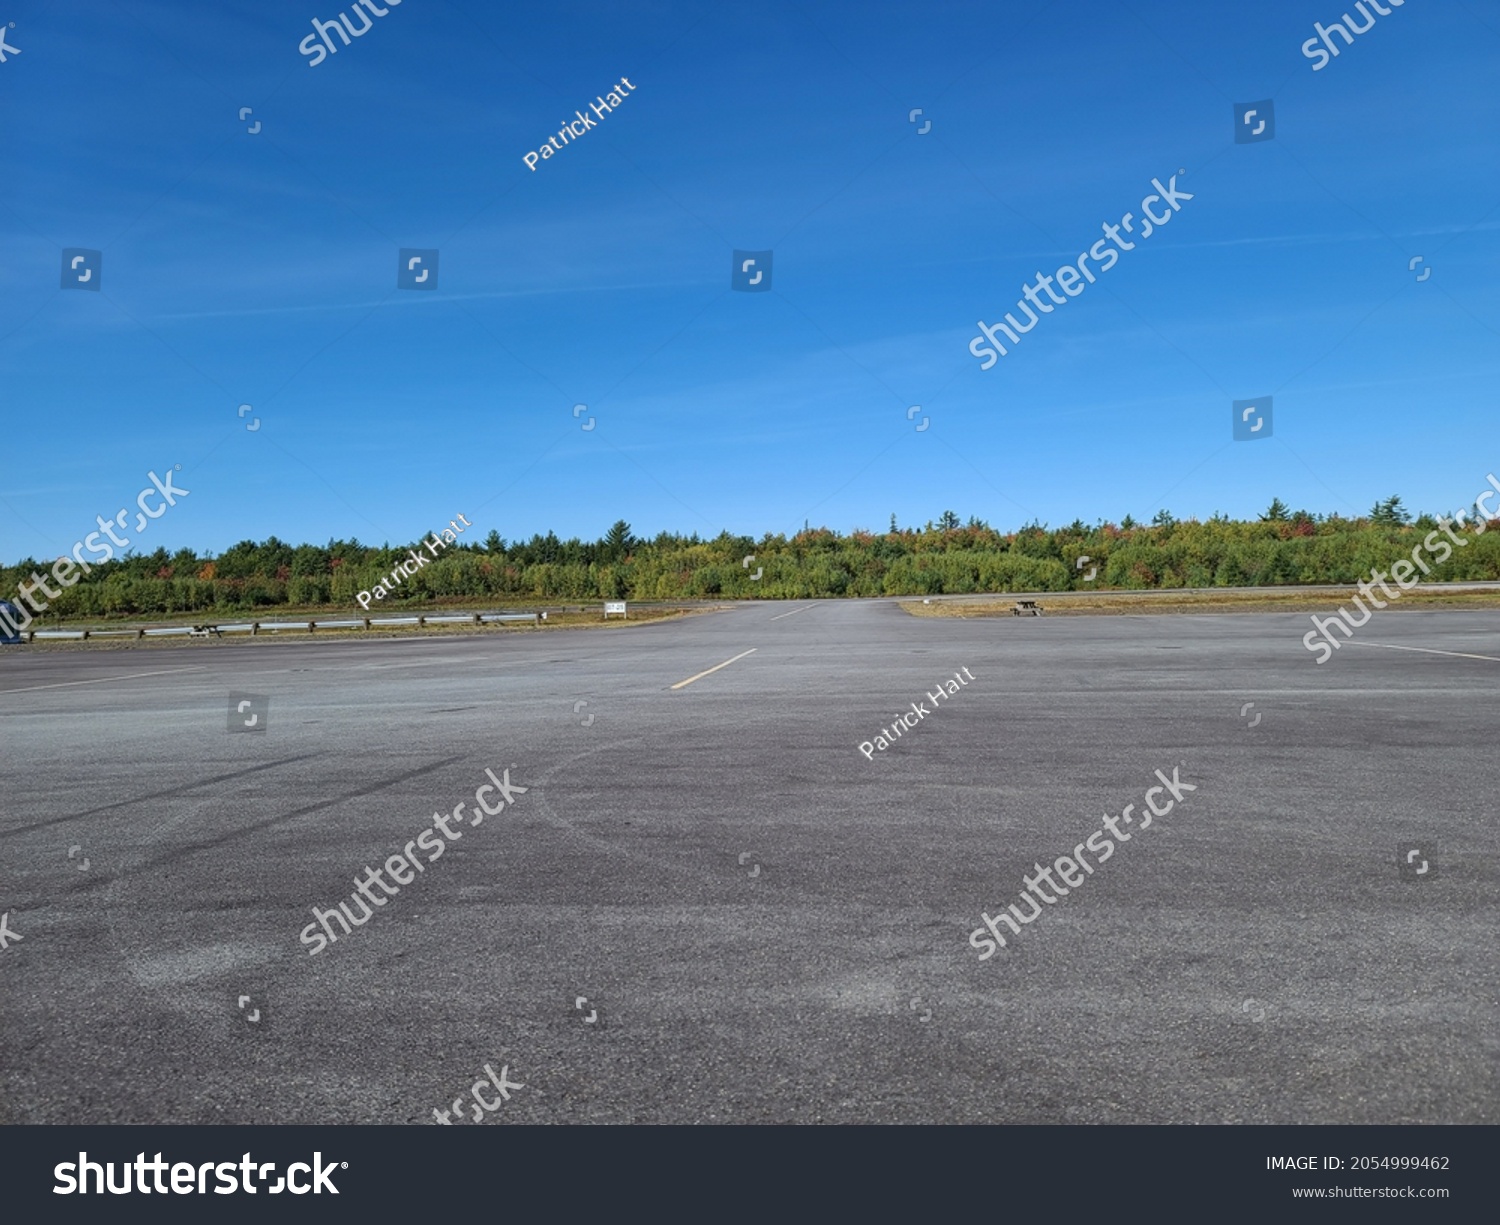 The large cement parking area at an airport. #2054999462